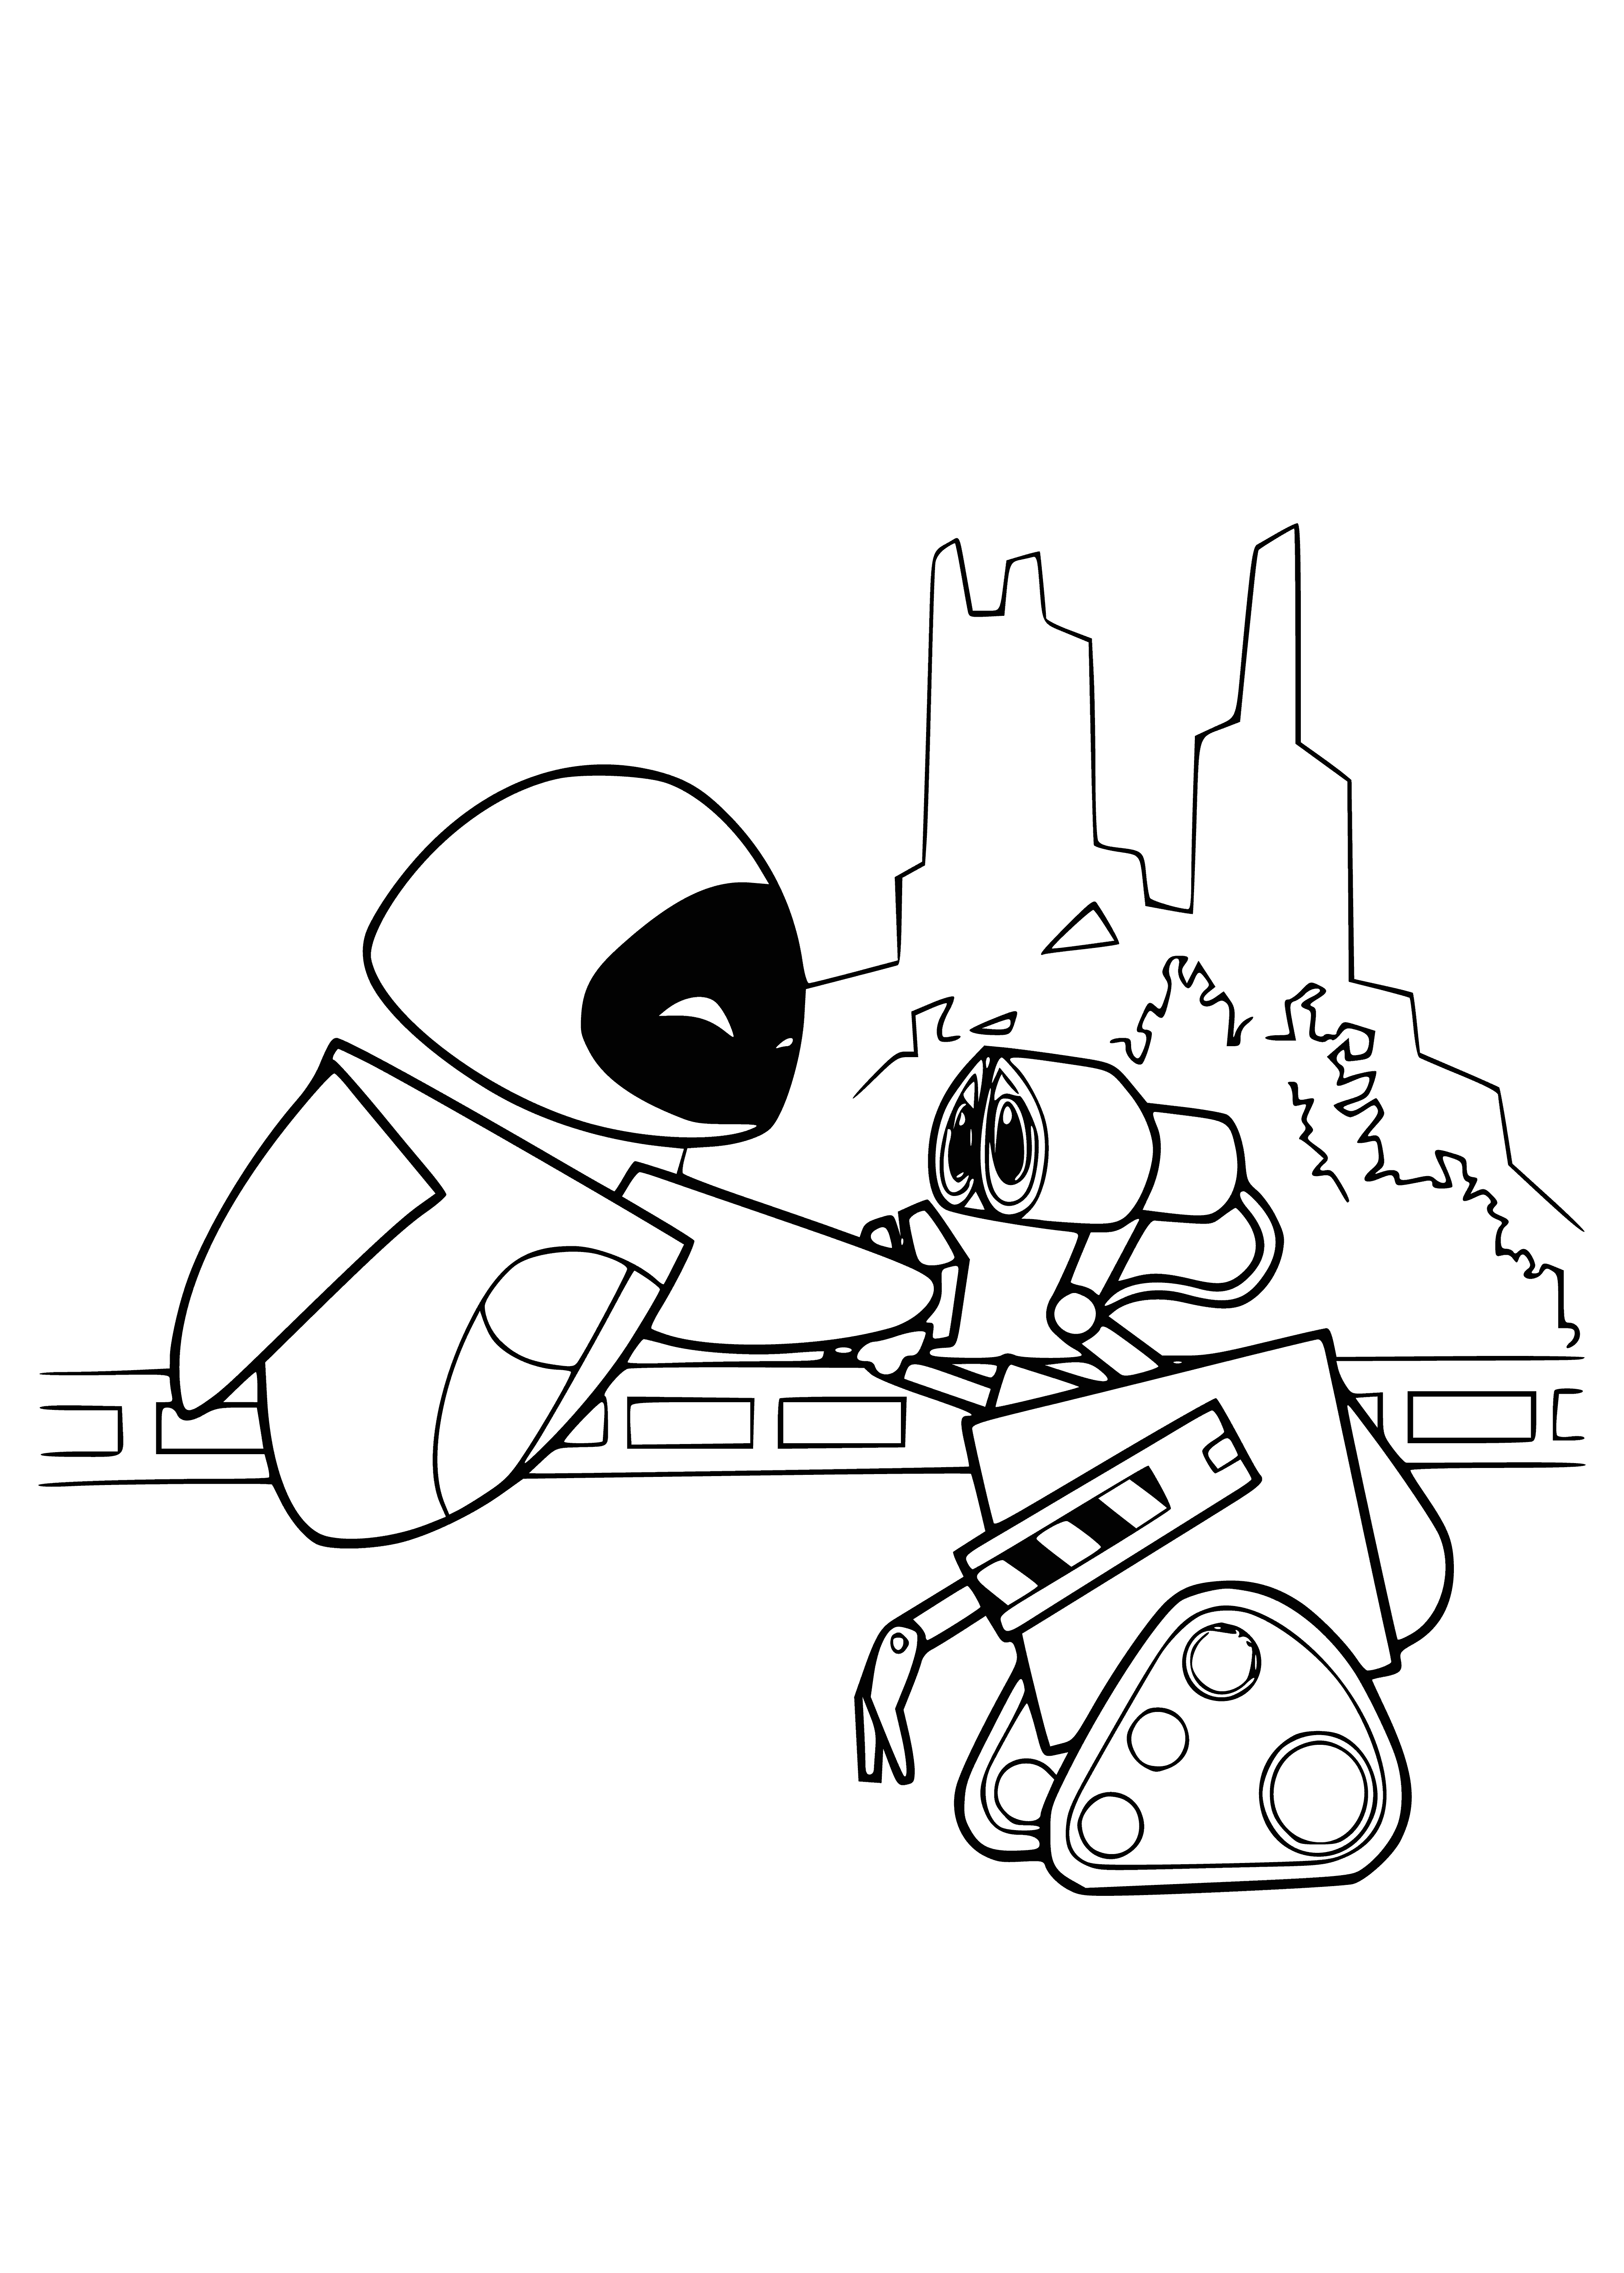 coloring page: Eve and Wall-e lovingly embrace on a lush, livable planet.